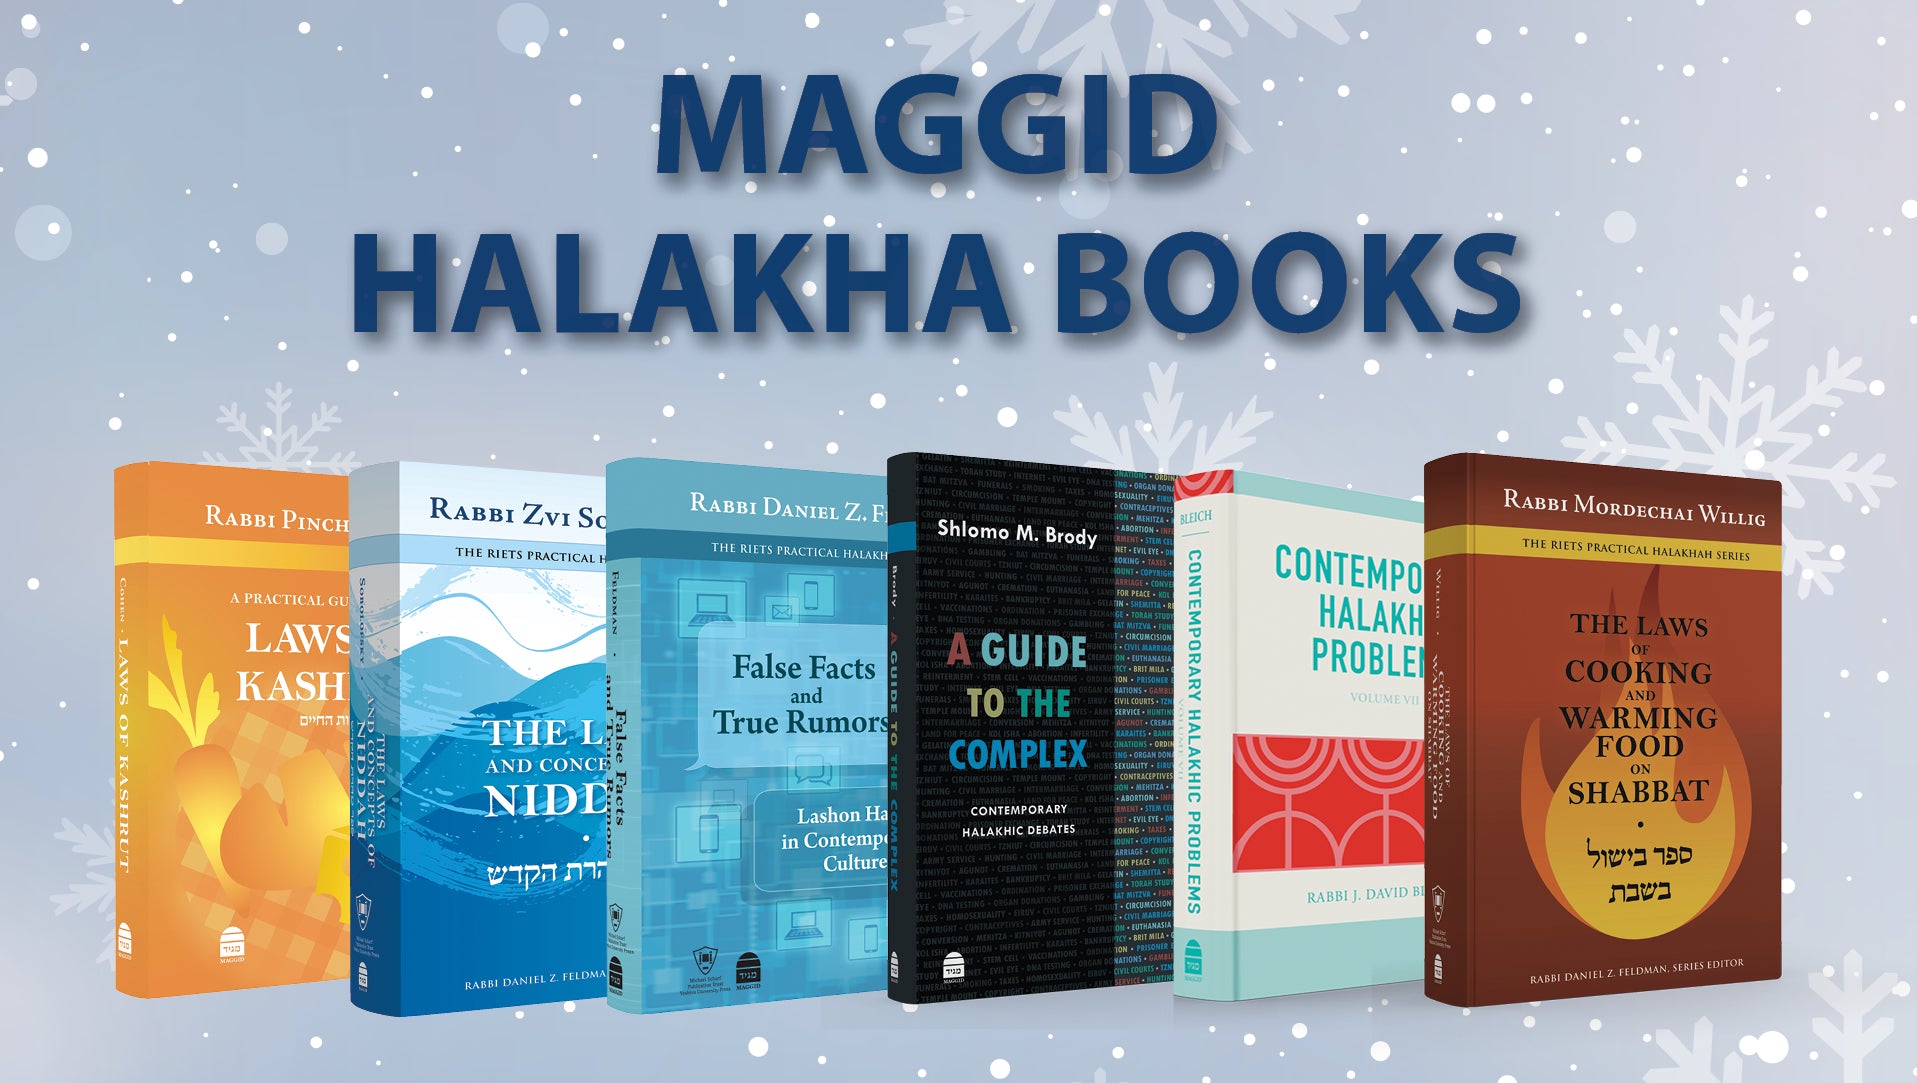 Maggid Books Halakha Collection Part 2